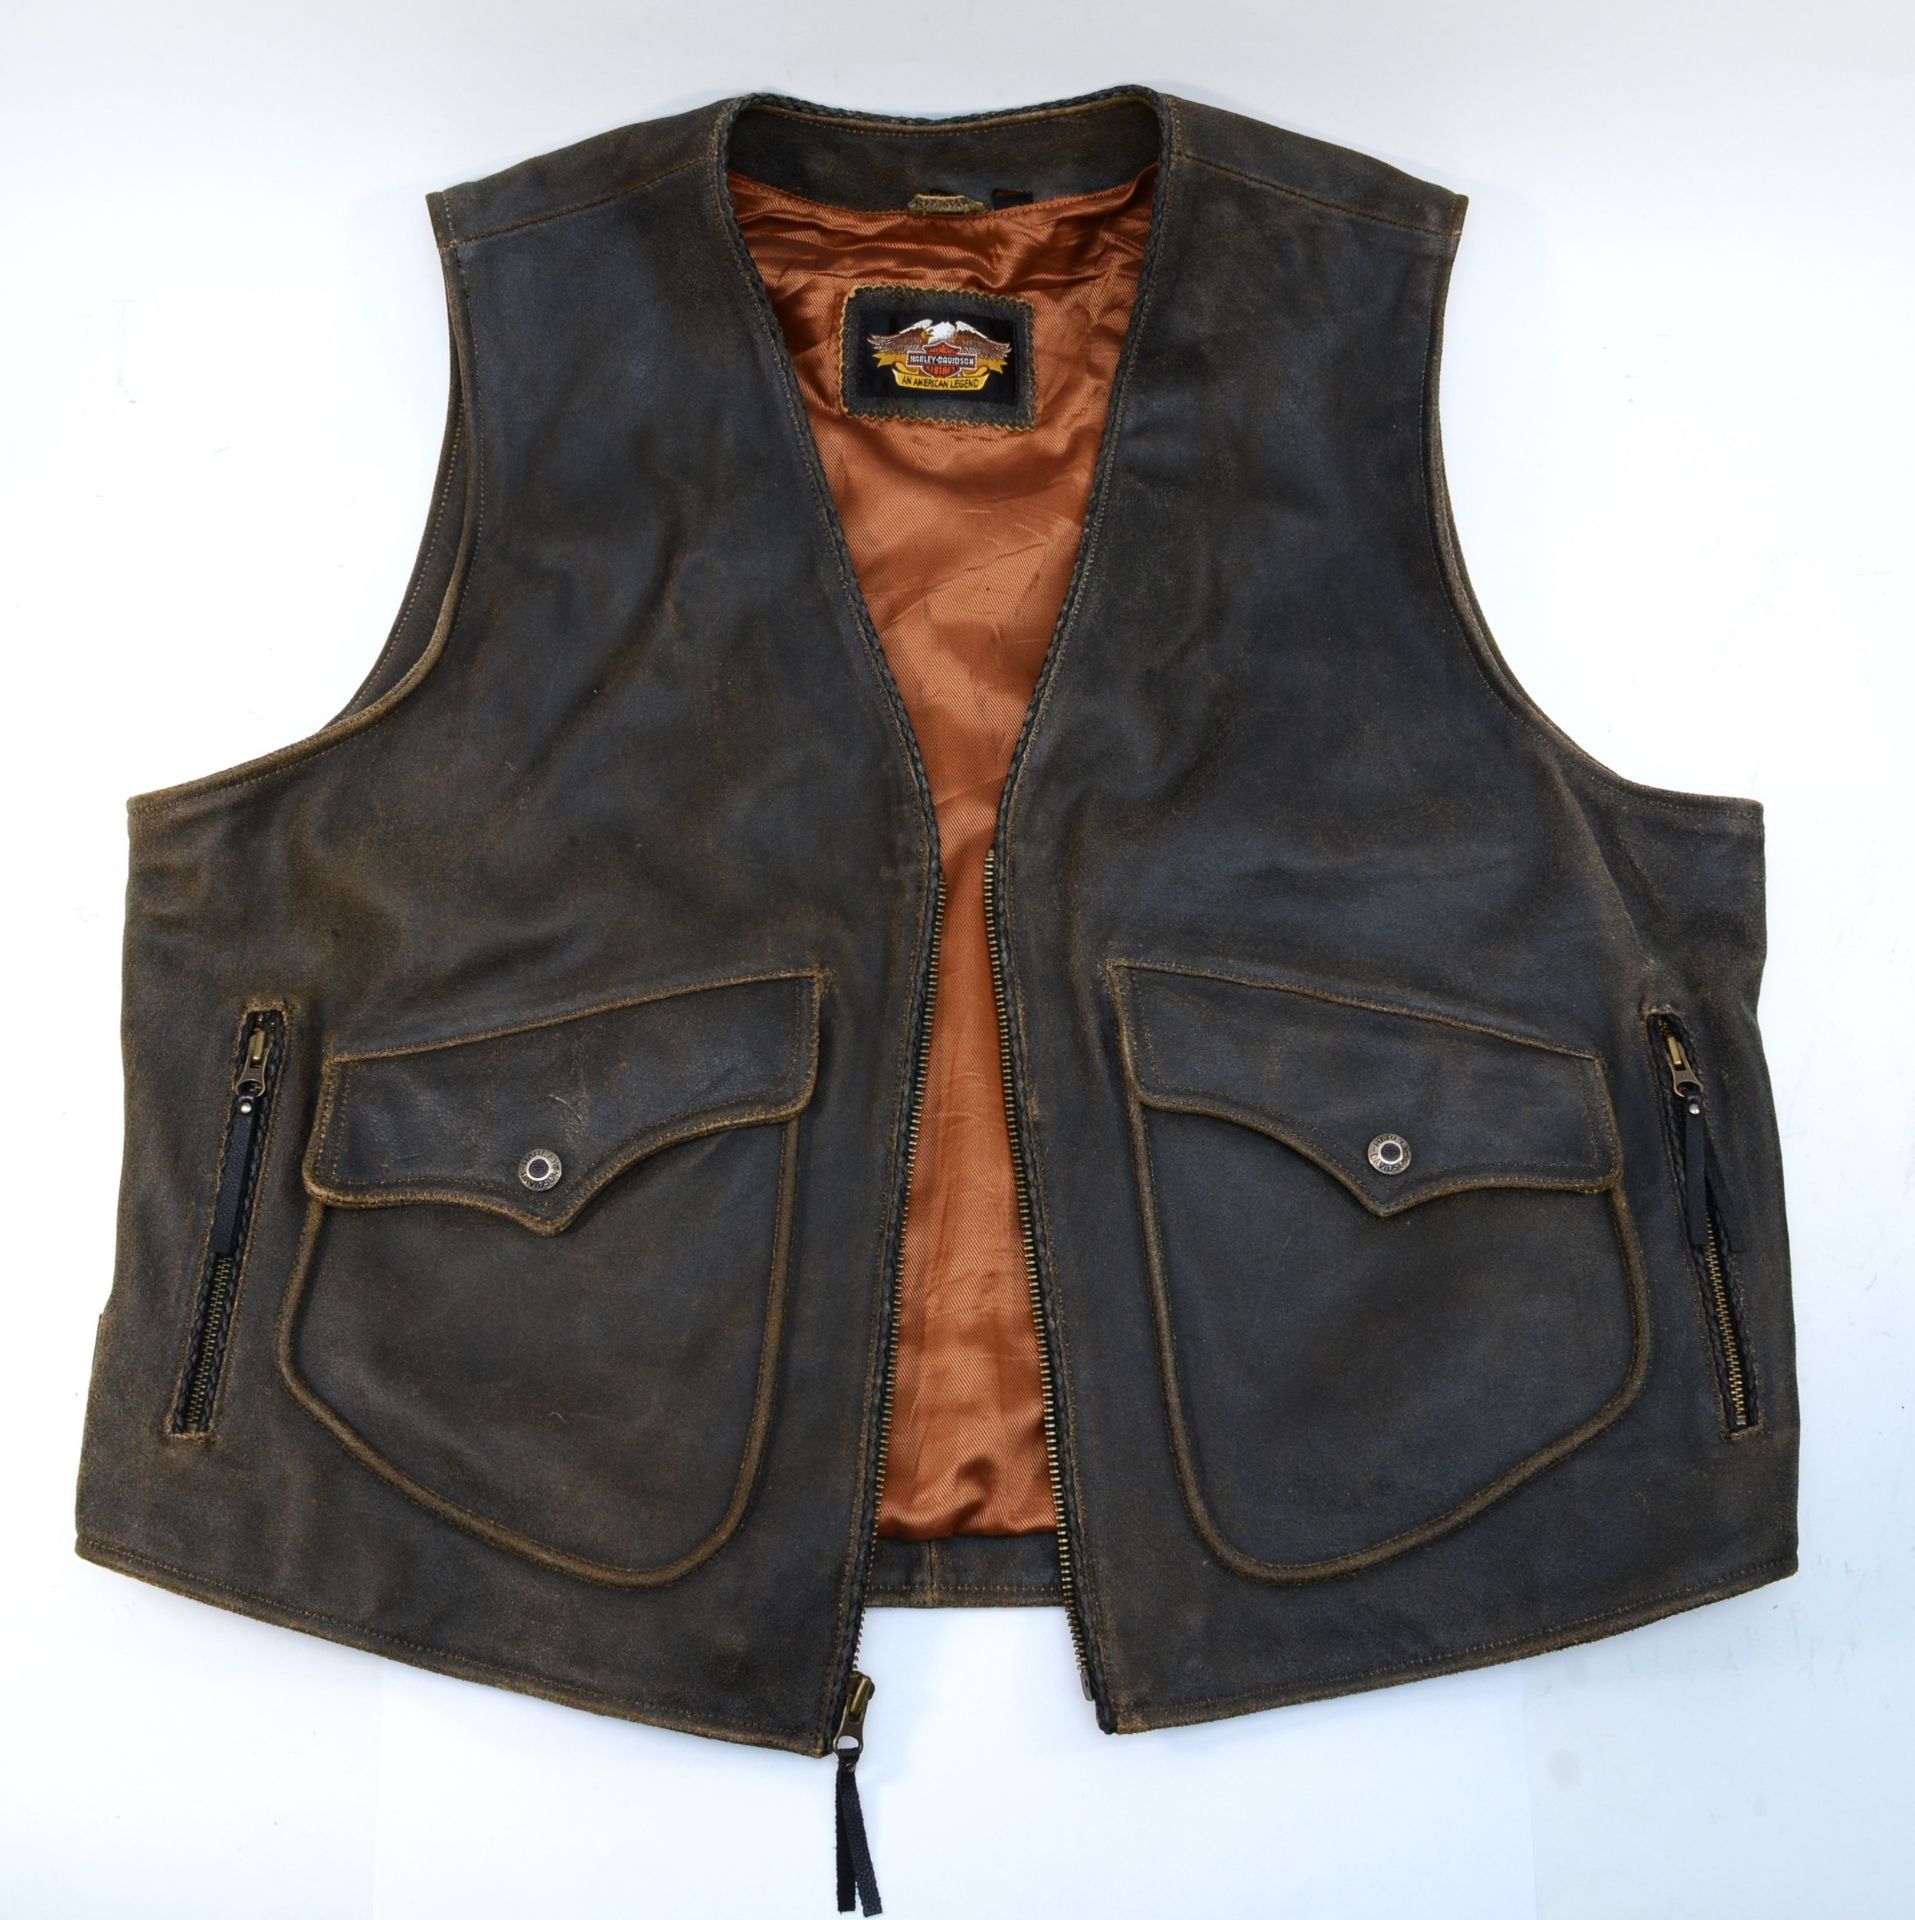 A Harley Davidson original leather waistcoat, size XXL, with embossed rear lower motif.